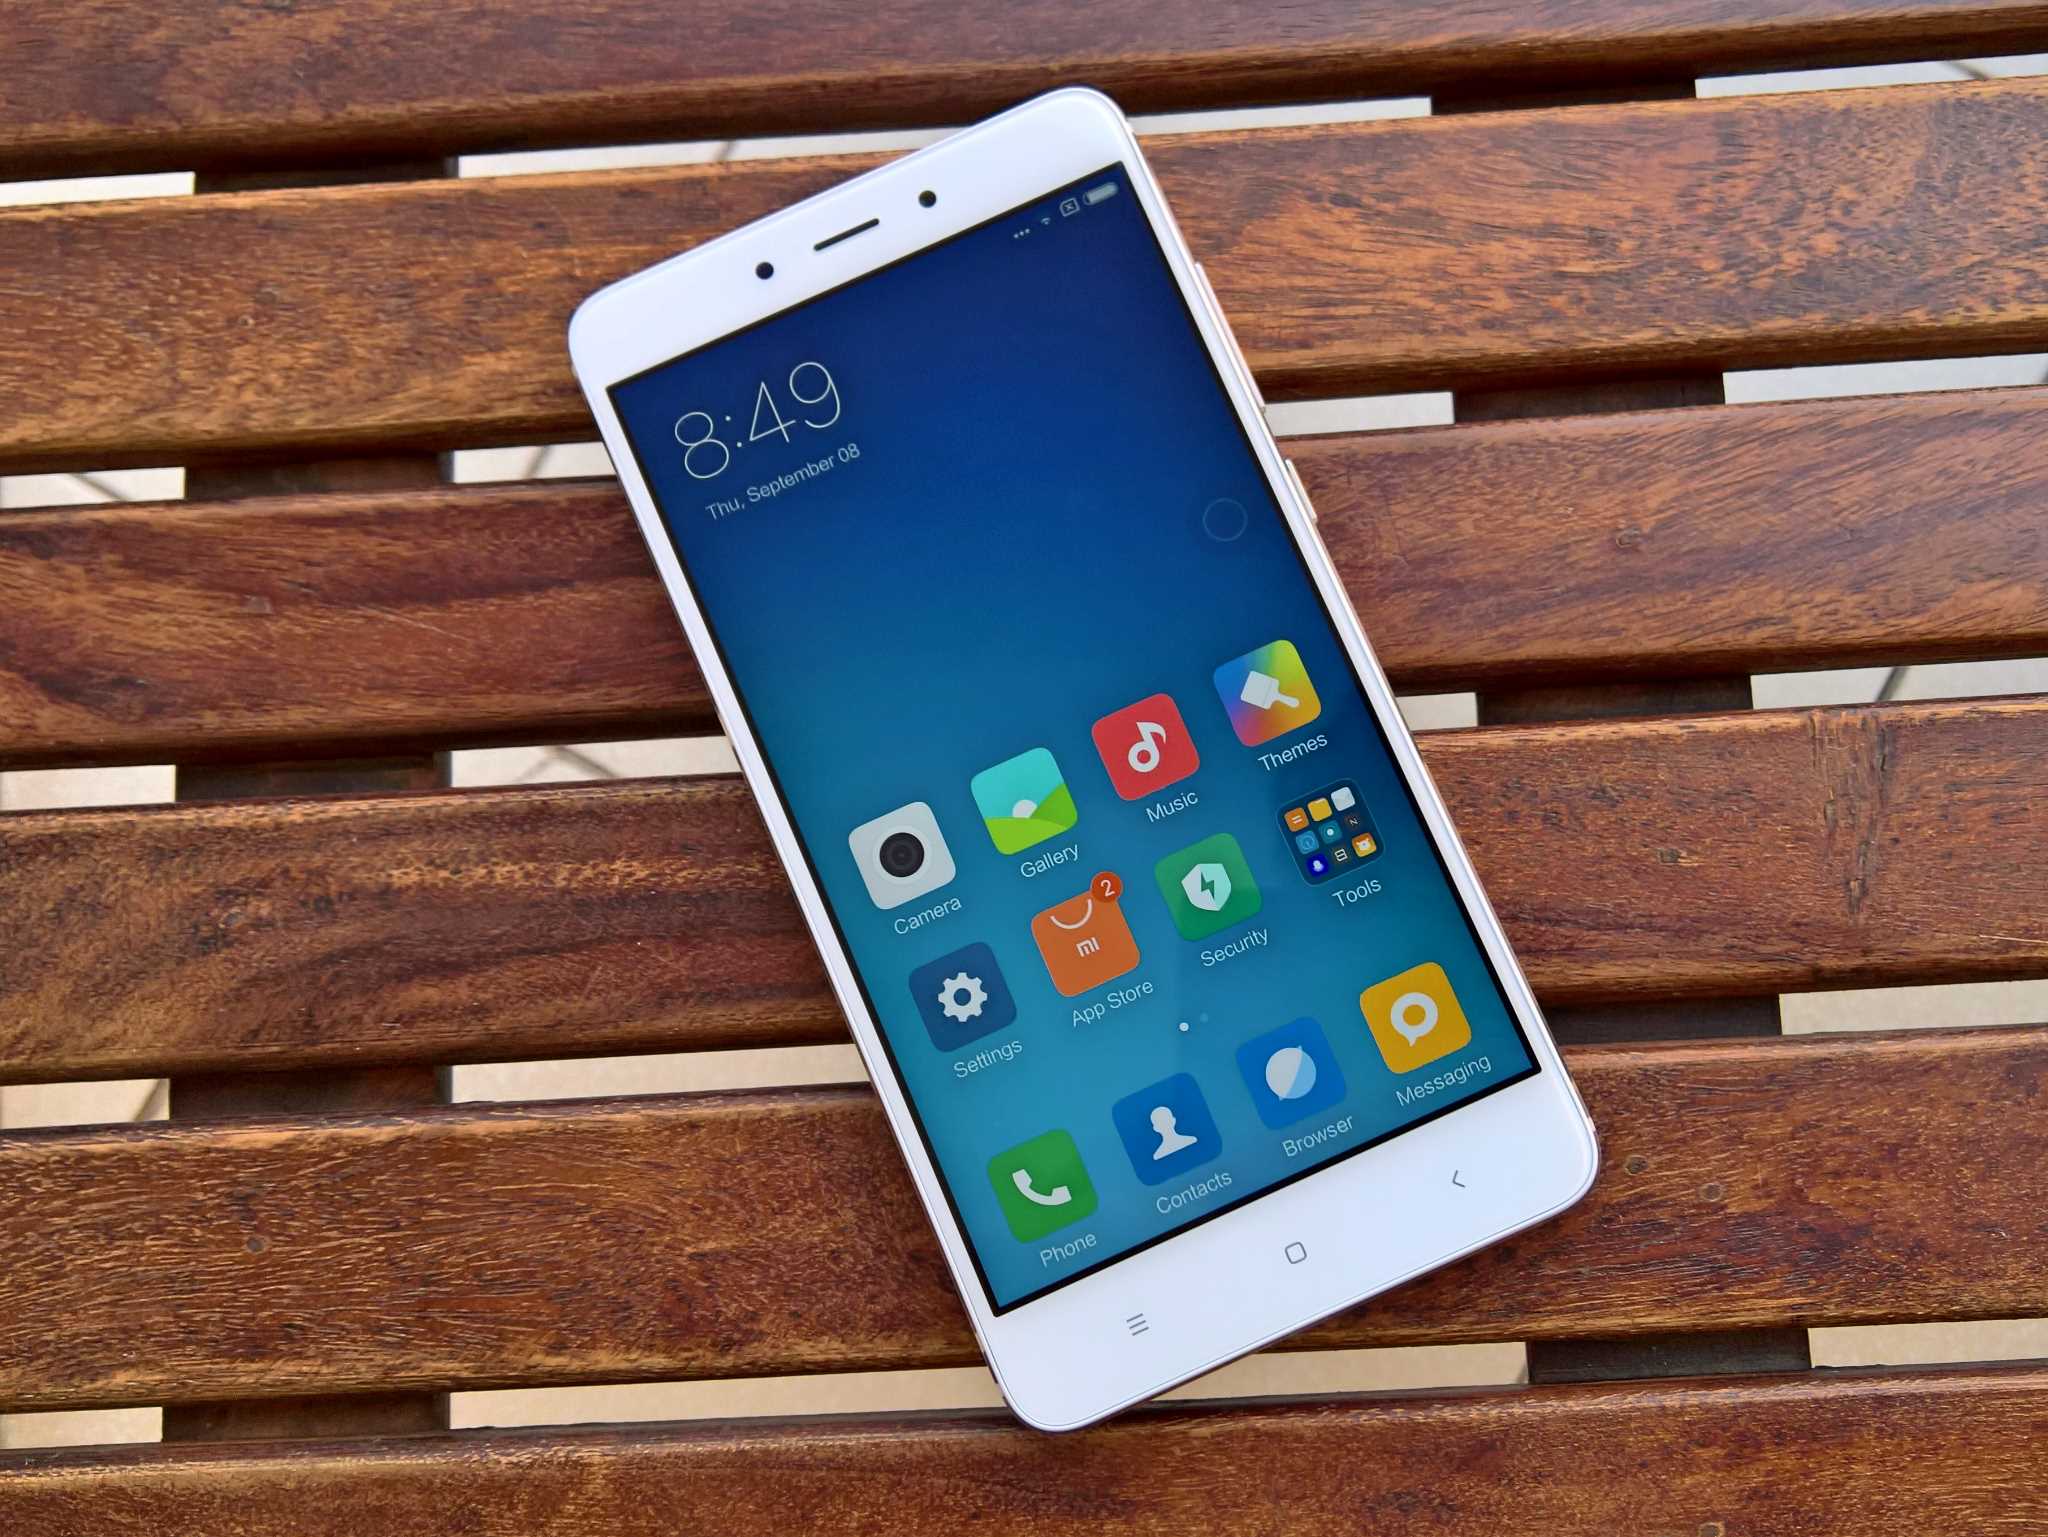 Xiaomi Redmi Note 4 (China) review: Another budget winner | Android Central